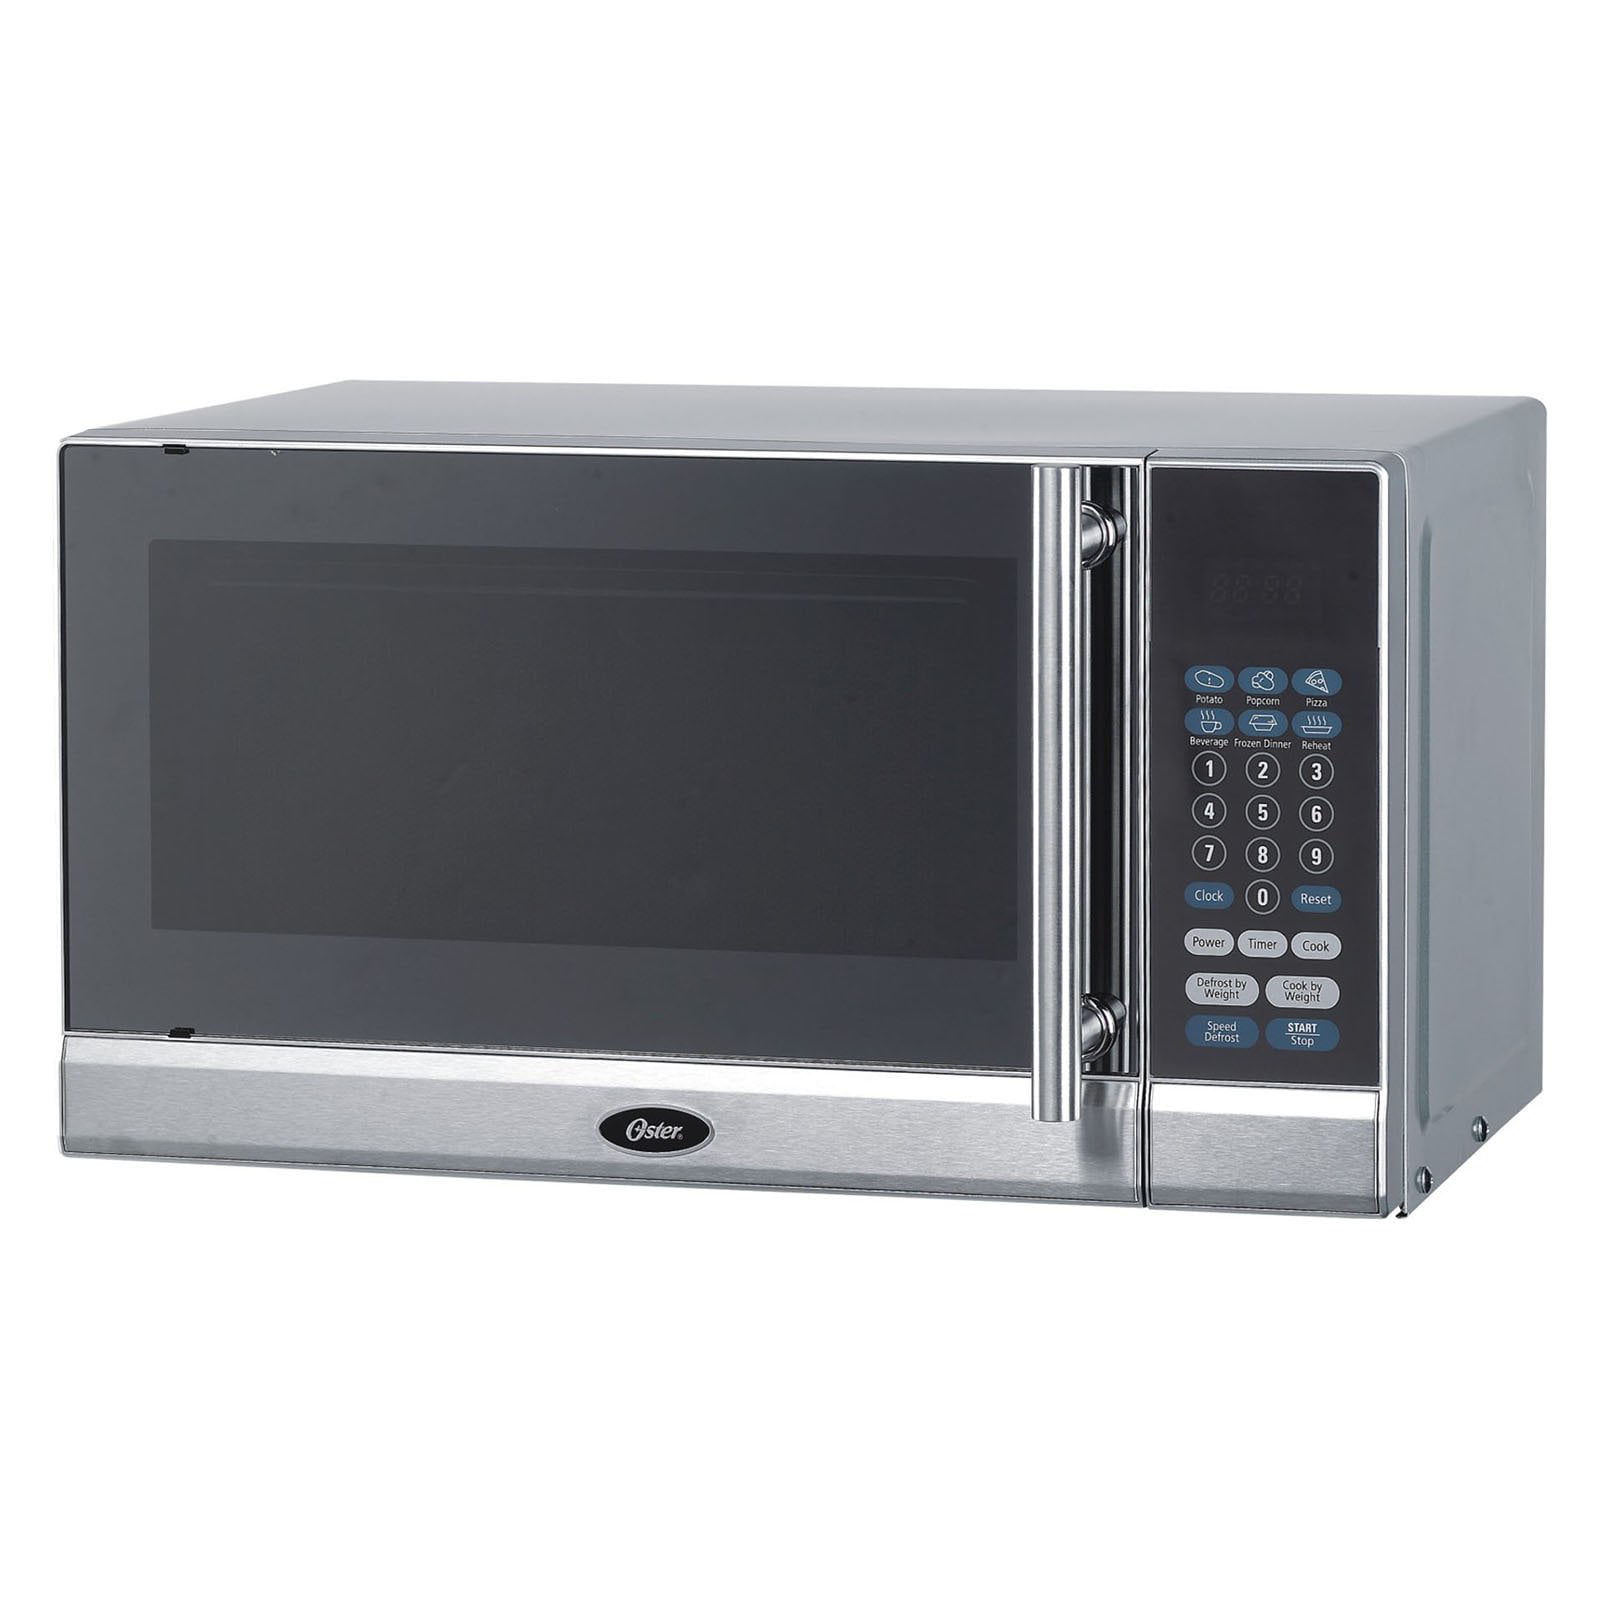 Oster 0 7 Cu Ft Microwave Oven Stainless Steel Walmart Com